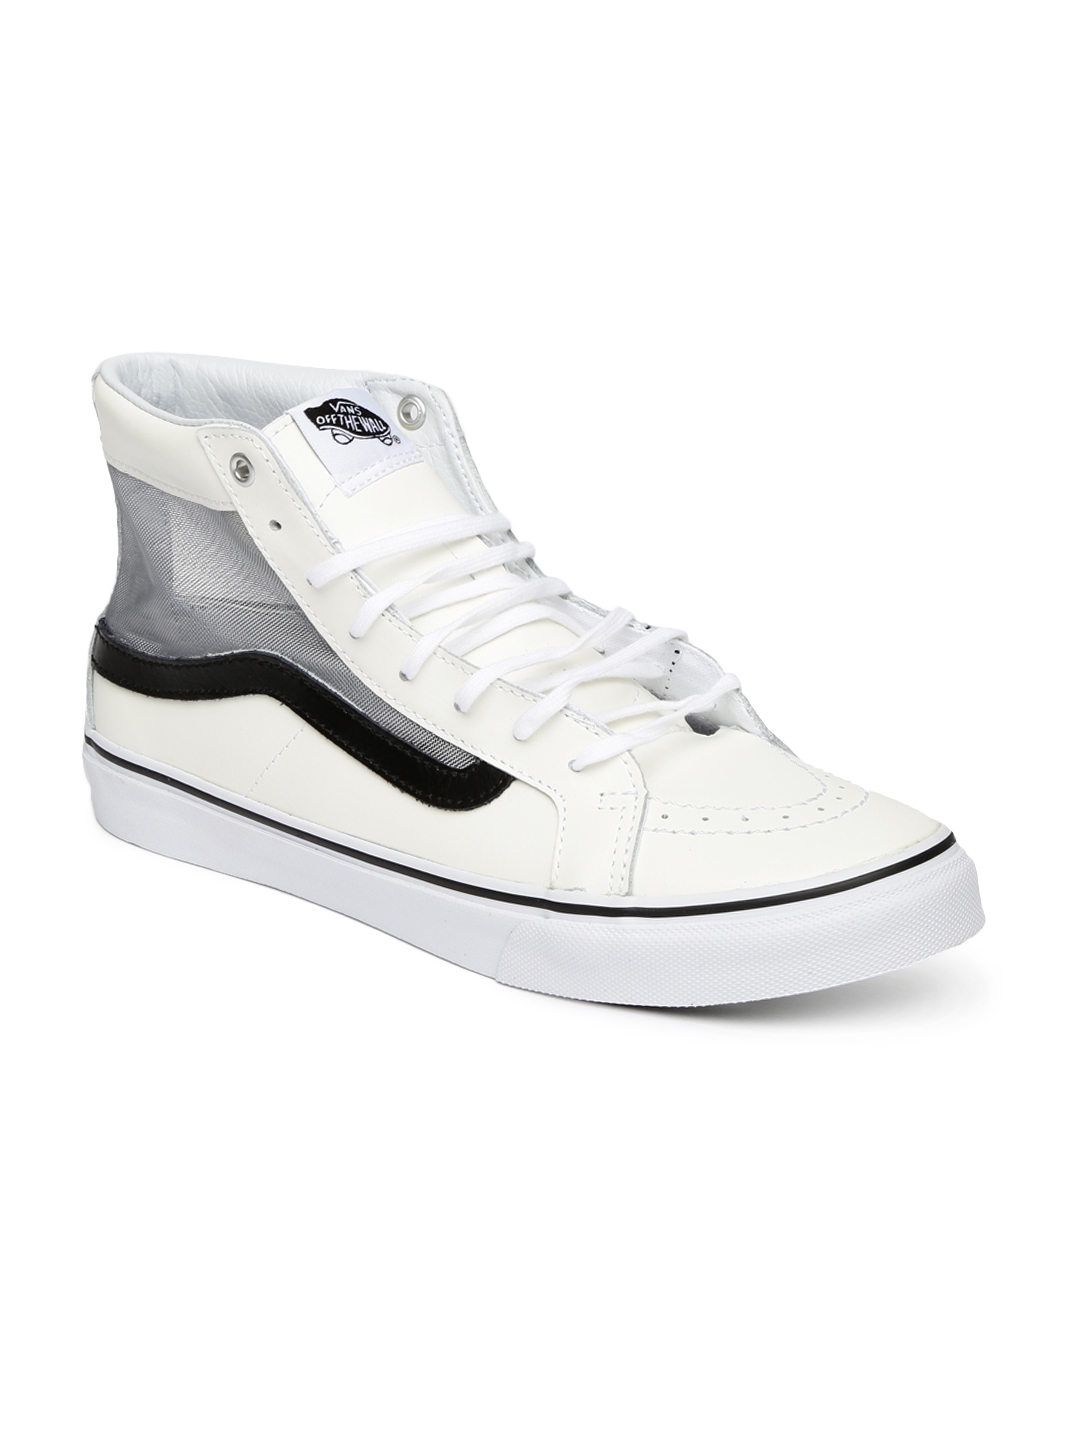 Buy Vans Unisex White Sk8 Hi Slim Casual Shoes - Casual Shoes for